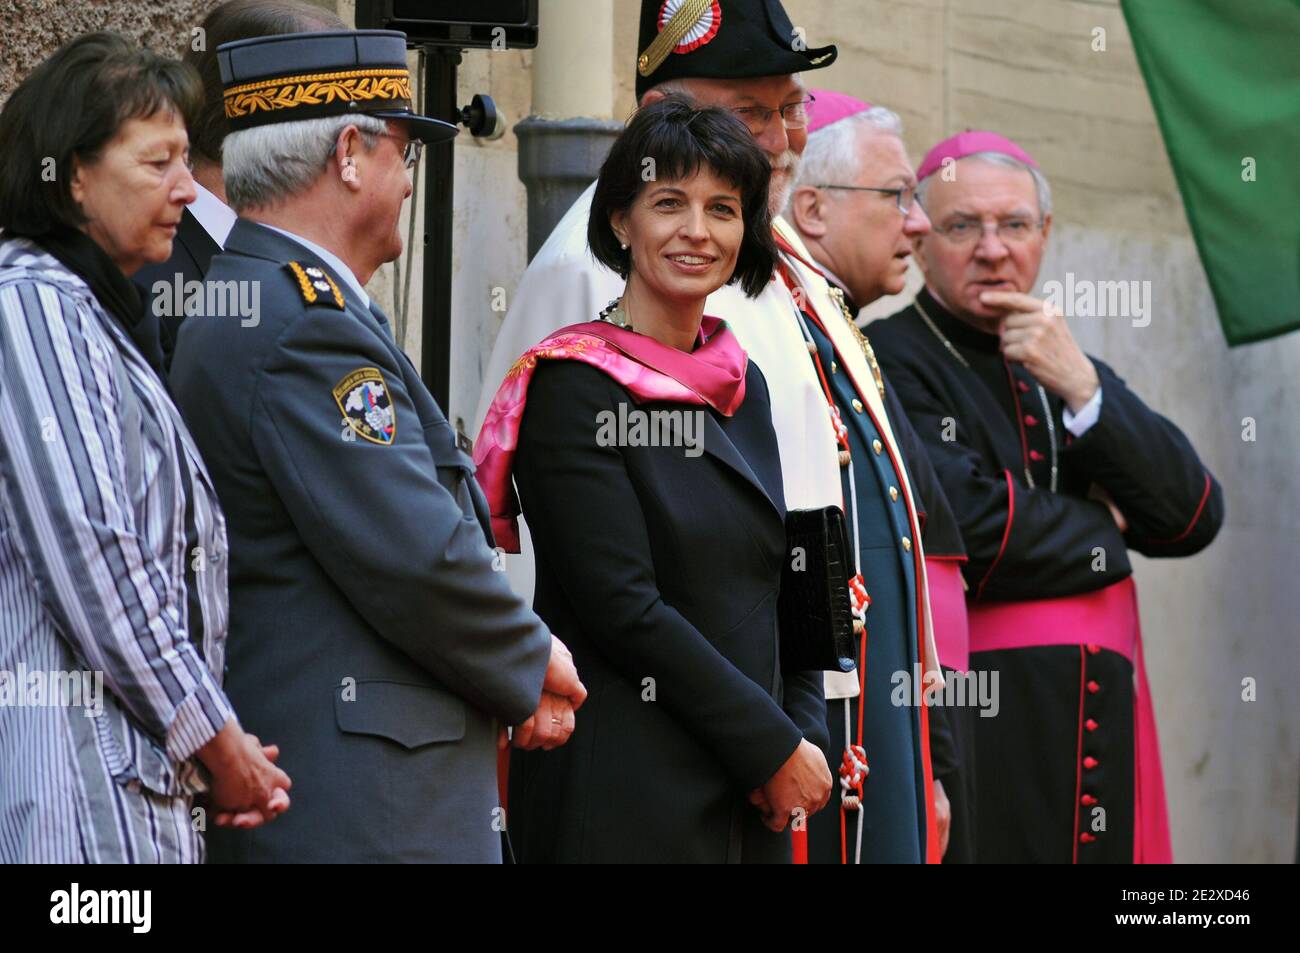 President of Swiss Confederation Doris Leuthard during a celebration commemorating the 1527 Sack of Rome, in the courtyard of the headquarters of the Swiss Guards, at the Vatican on May 6, 2010. The ceremony is held each May 6 to commemorate the 147 Swiss Guards who died protecting Pope Clement VII during the 1527 Sack of Rome carried out by the mutinous troops of Charles V, Holy Roman Emperor. Photo by ABACAPRESS.COM Stock Photo